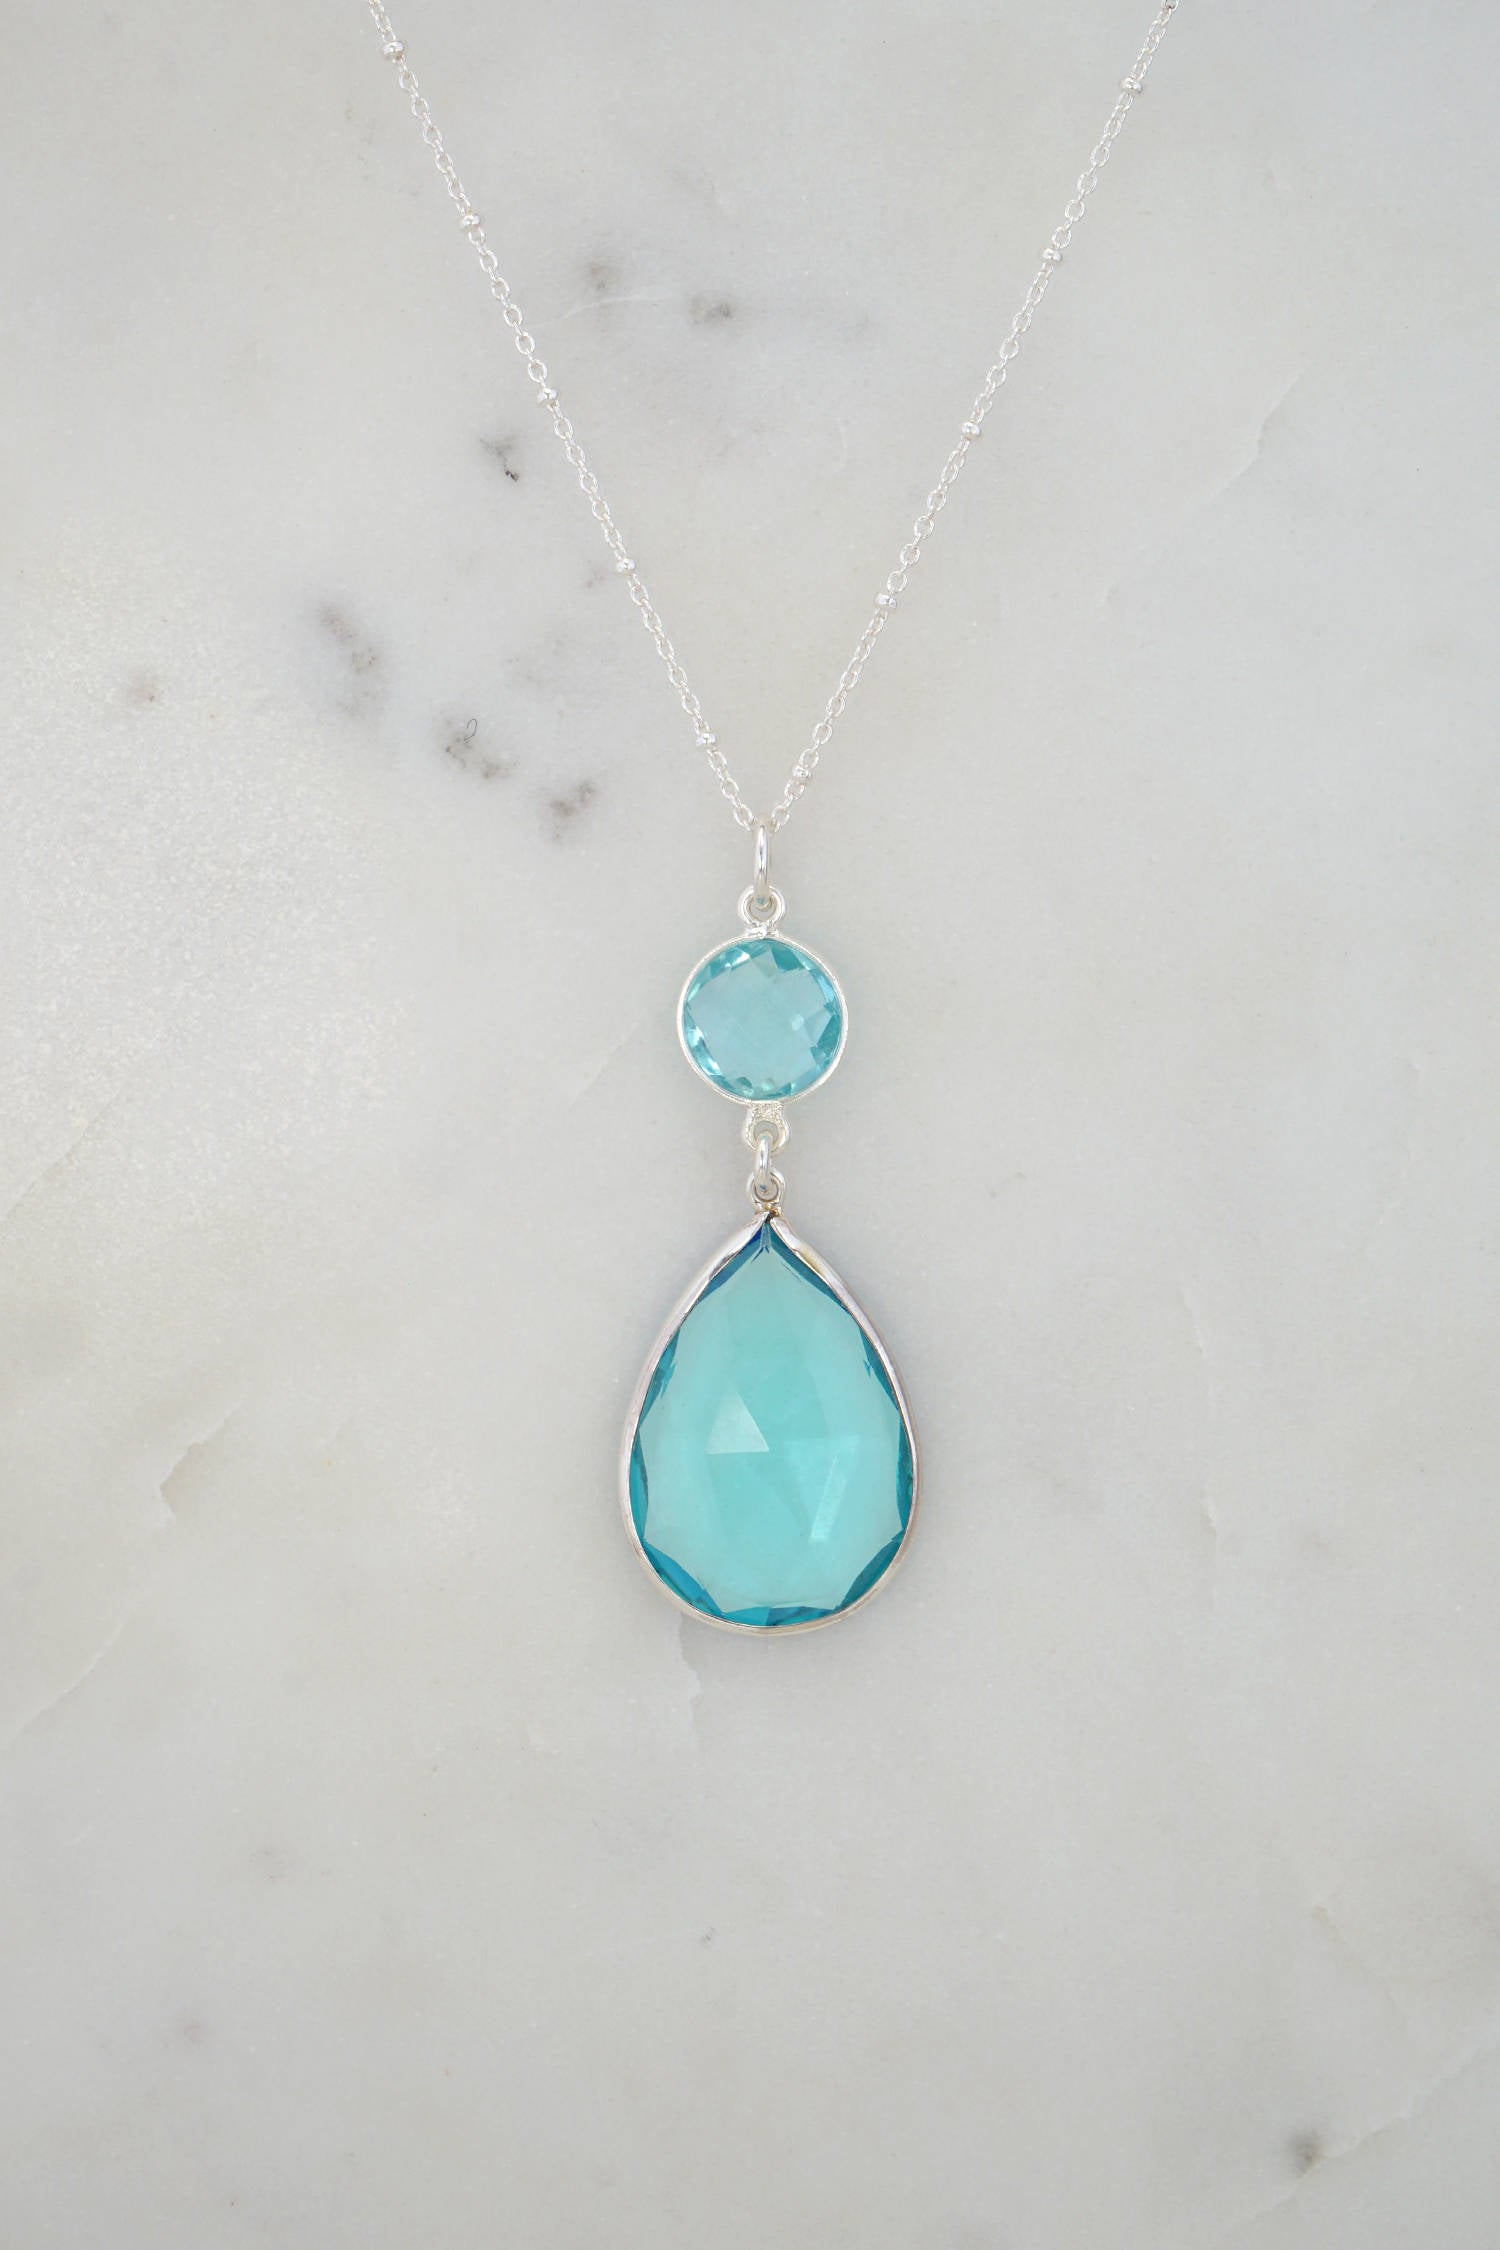 Aquamarine Necklace, March Birthstone Necklace, Large Pendant Silver Necklace, Natural stone Necklace, Blue Topaz Necklace, Gift for her